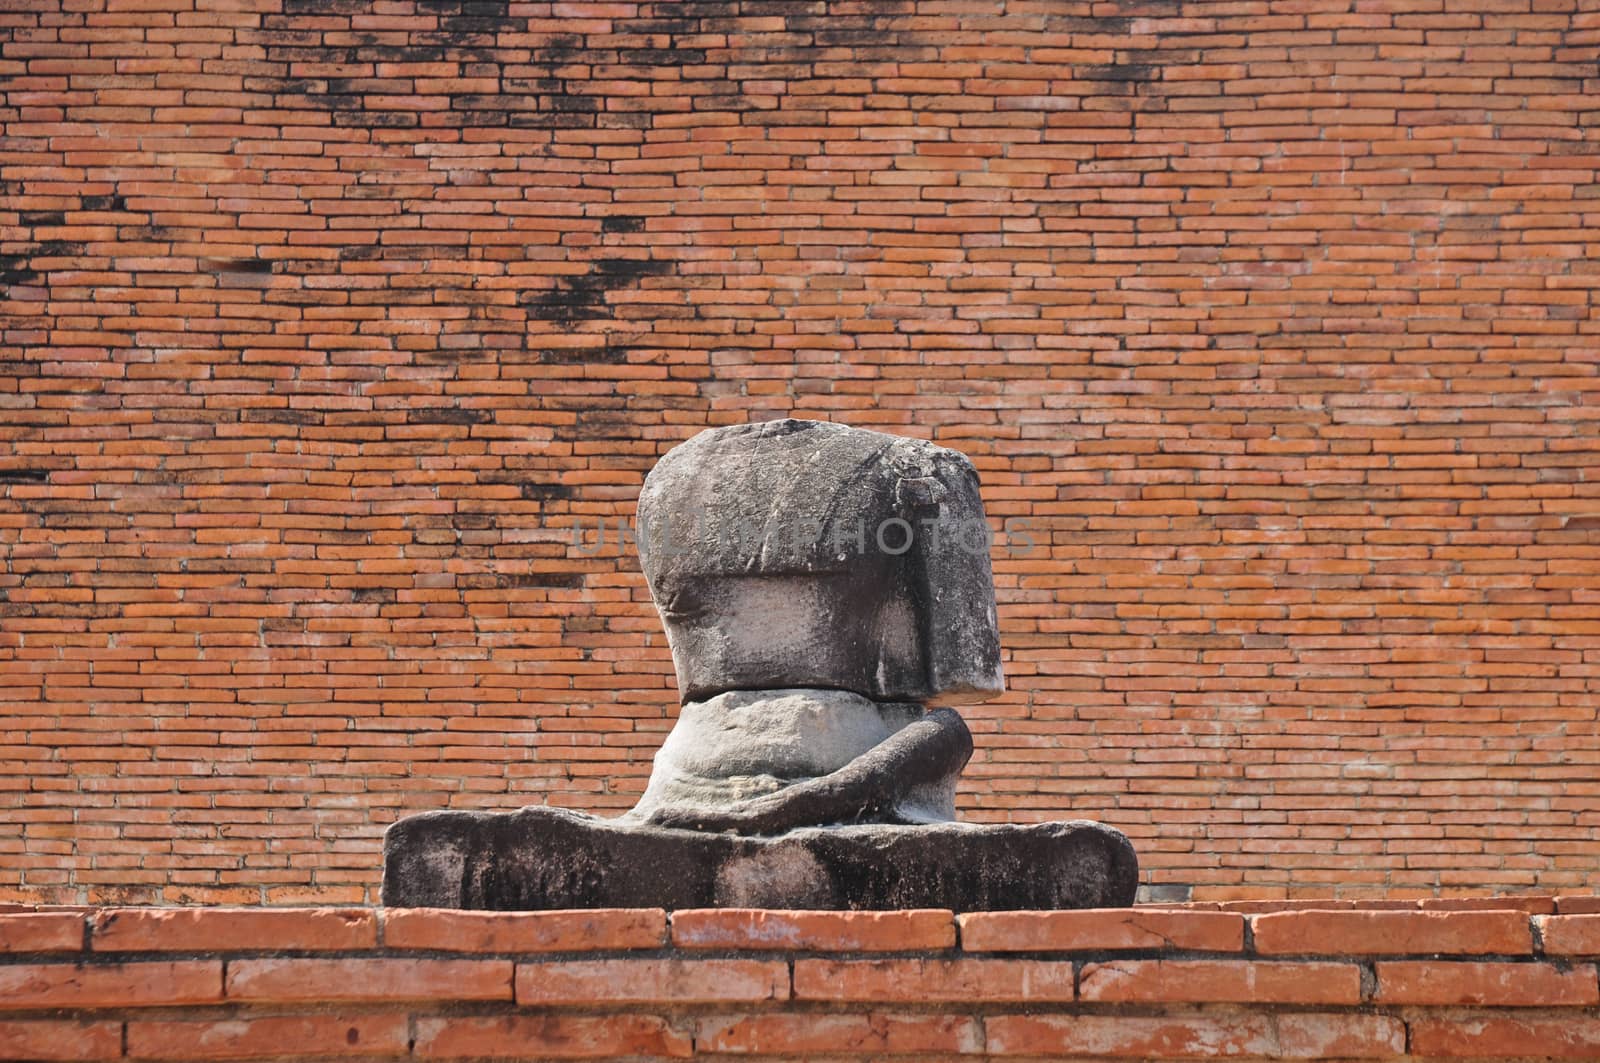 Sitting ancient Buddha statue in Thailand old brick temple